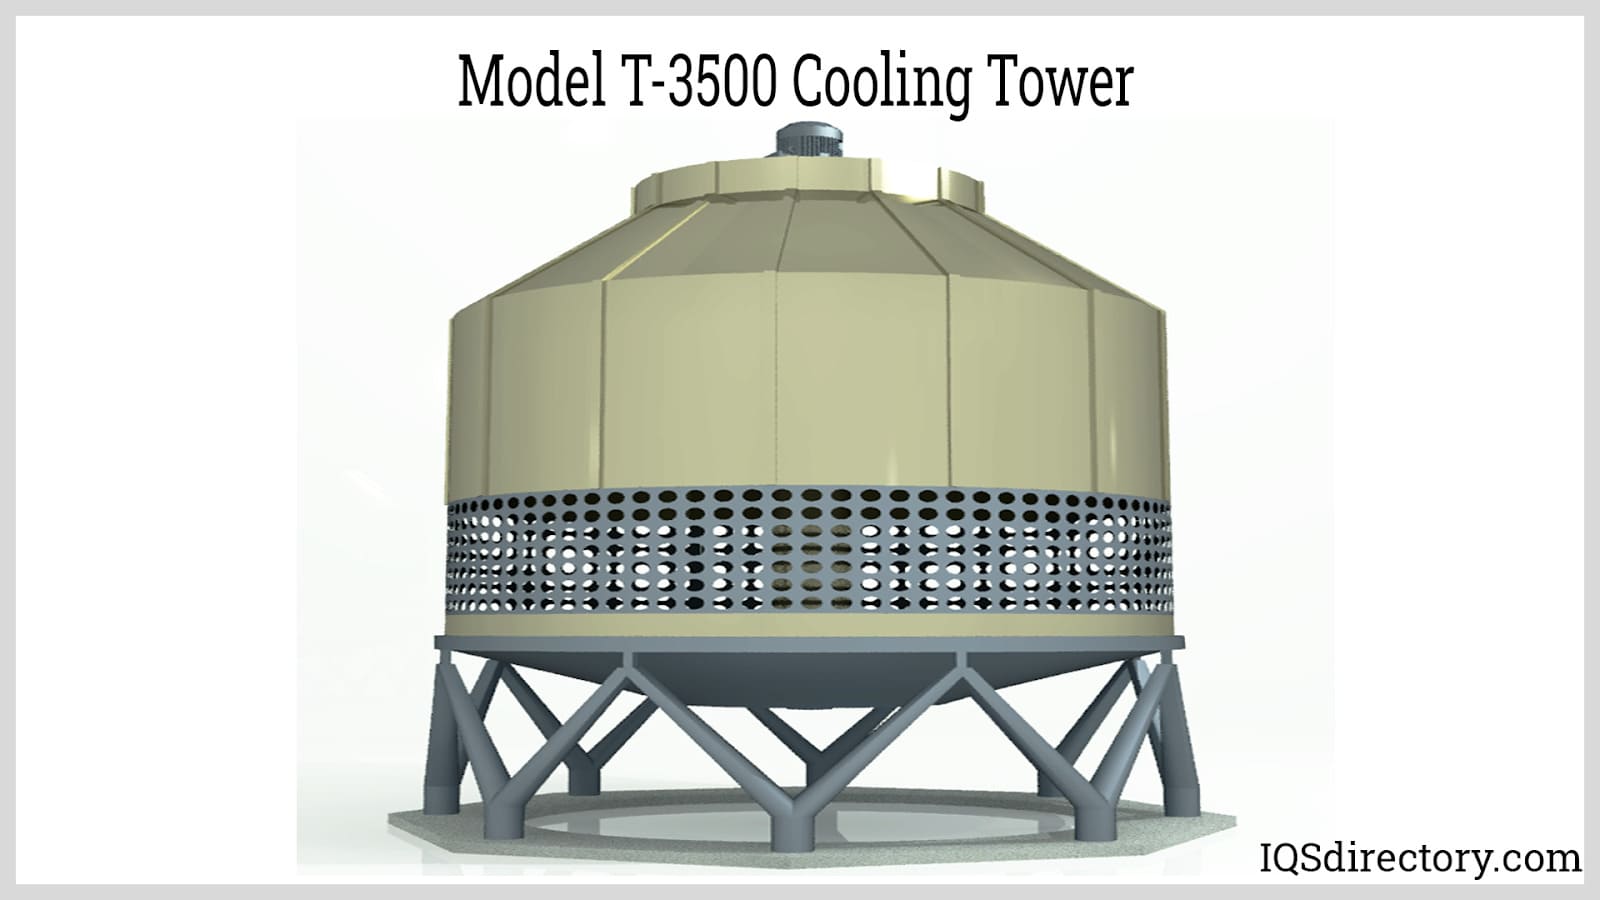 Model T-3500 Cooling Tower